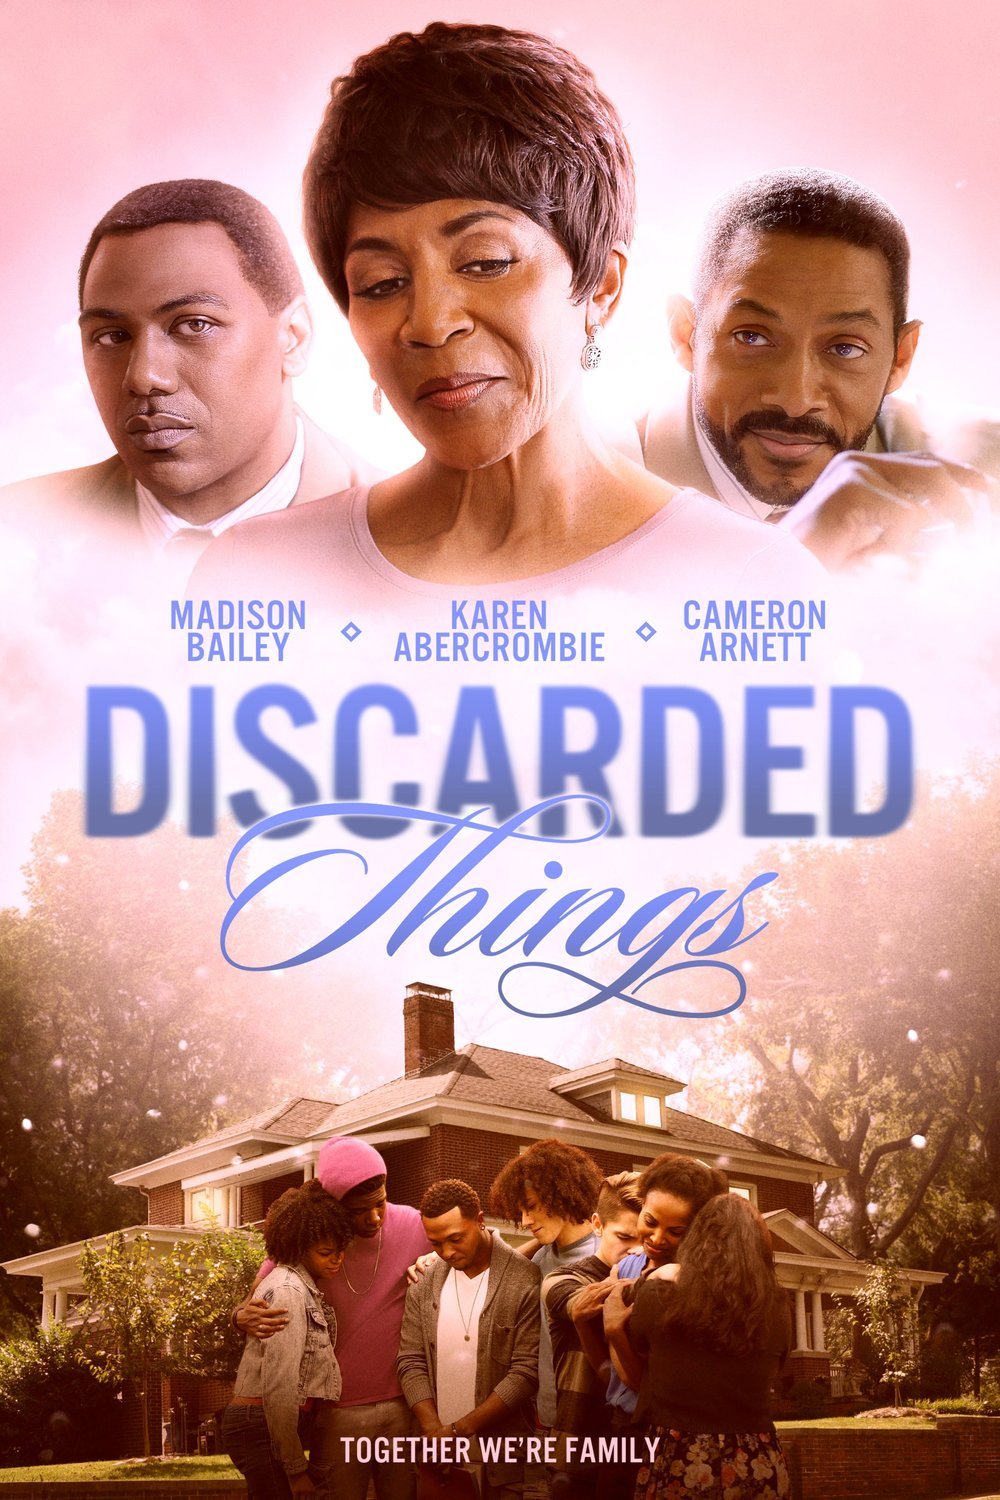 L'affiche du film Discarded Things